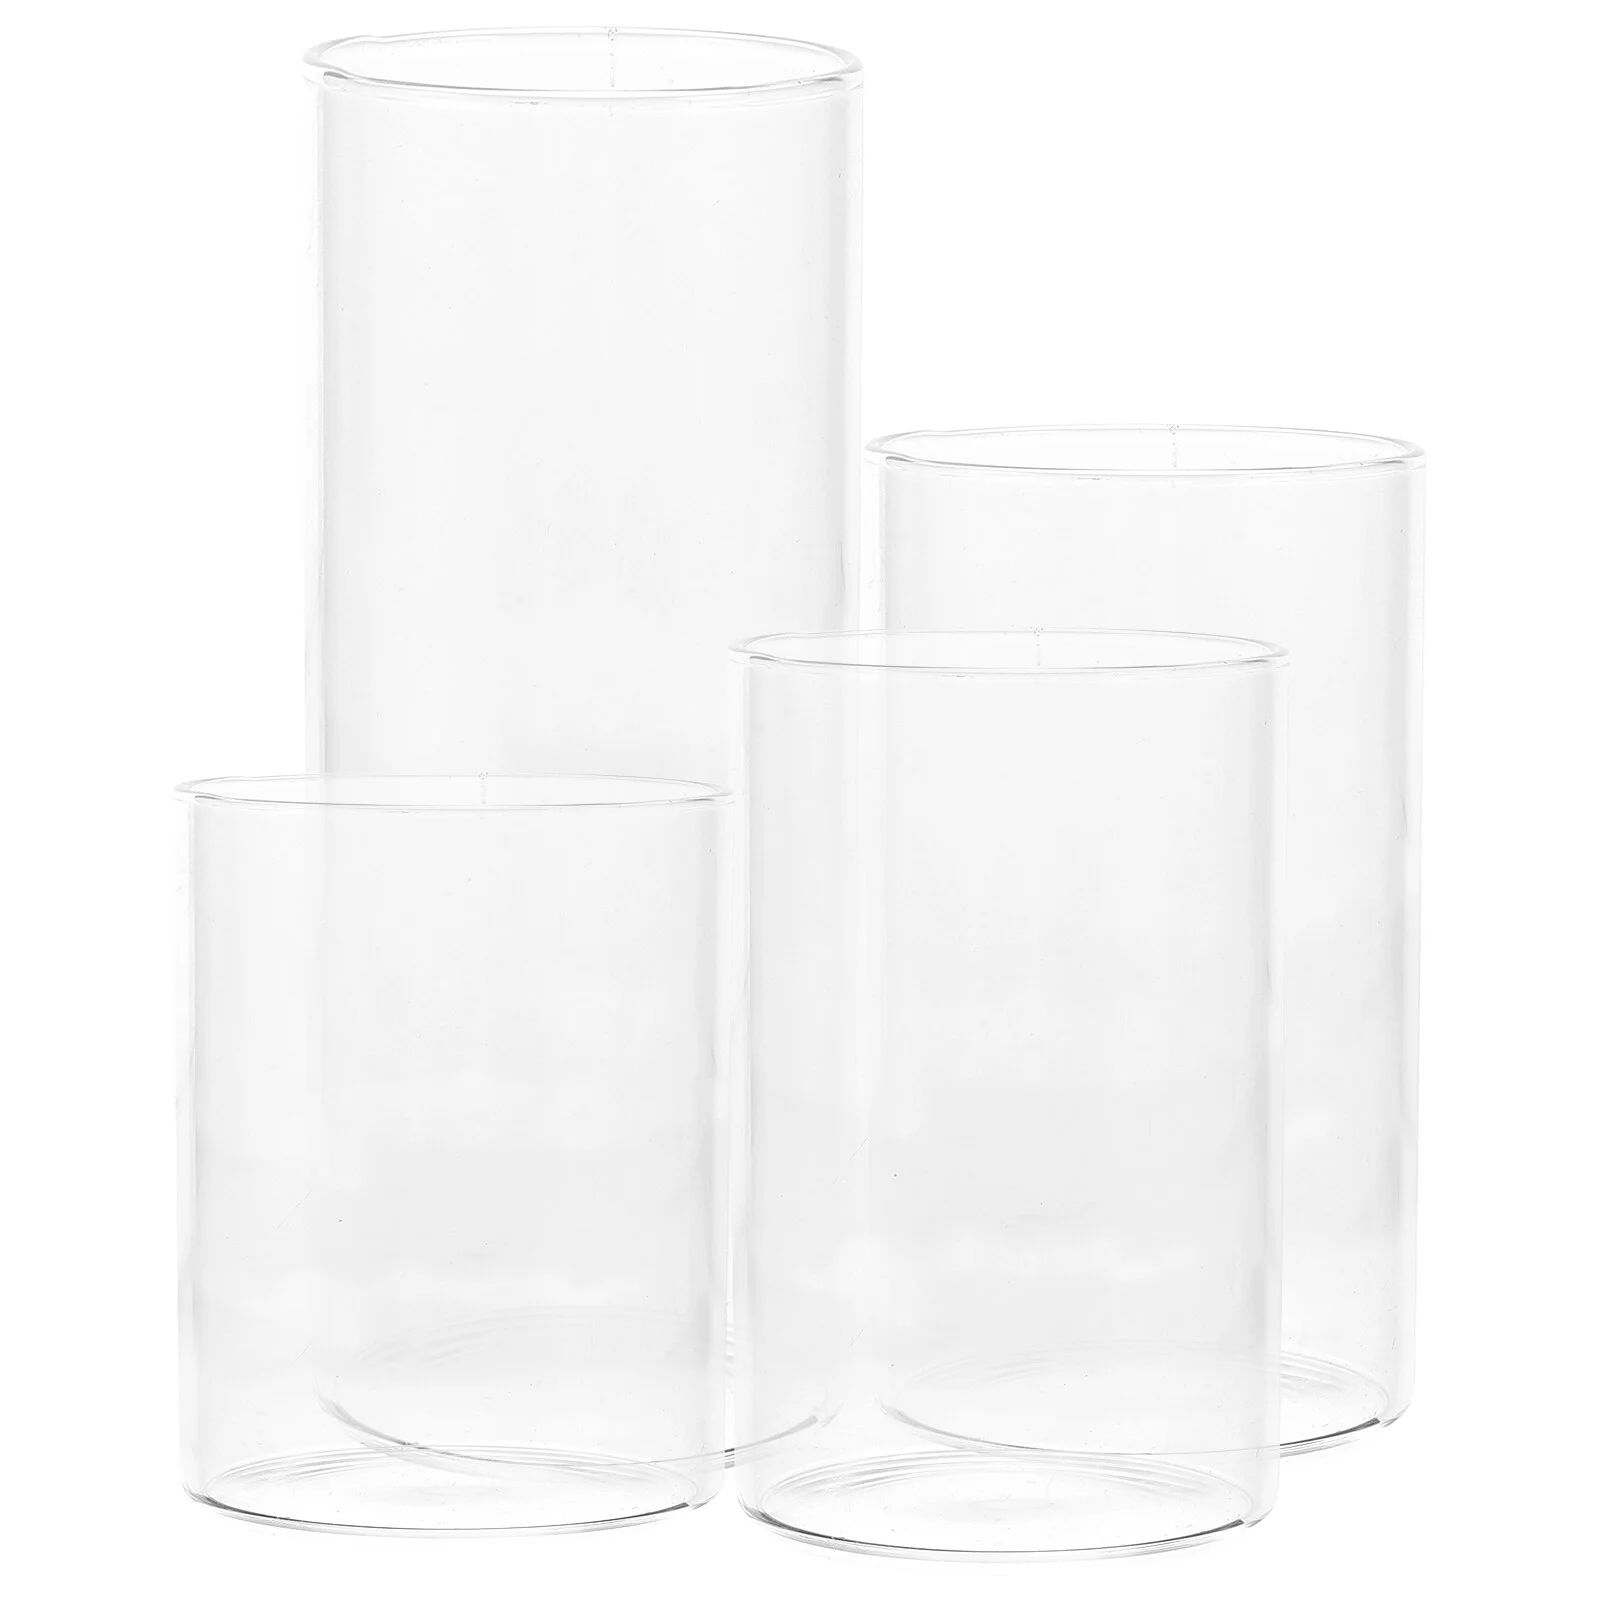 

4 Pcs Protector Glass Table Top Cylinders Holder Pillar Candles European Style Tall Holders Clear Household Shades